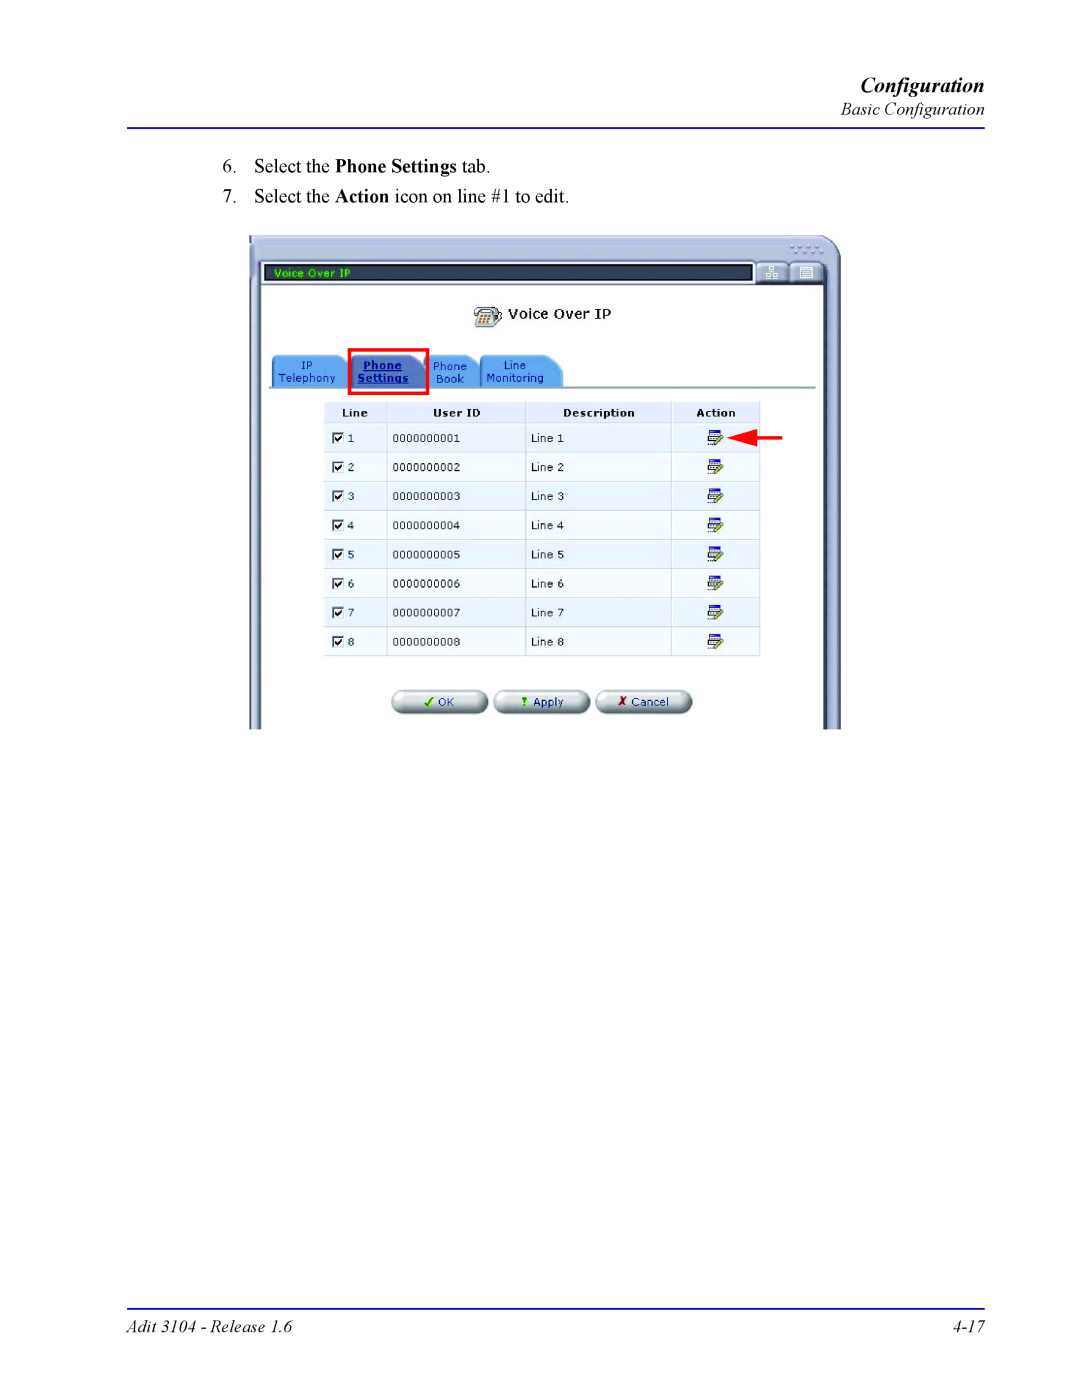 Carrier Access Adit 3104 Configuration, Select the Phone Settings tab, Select the Action icon on line #1 to edit 